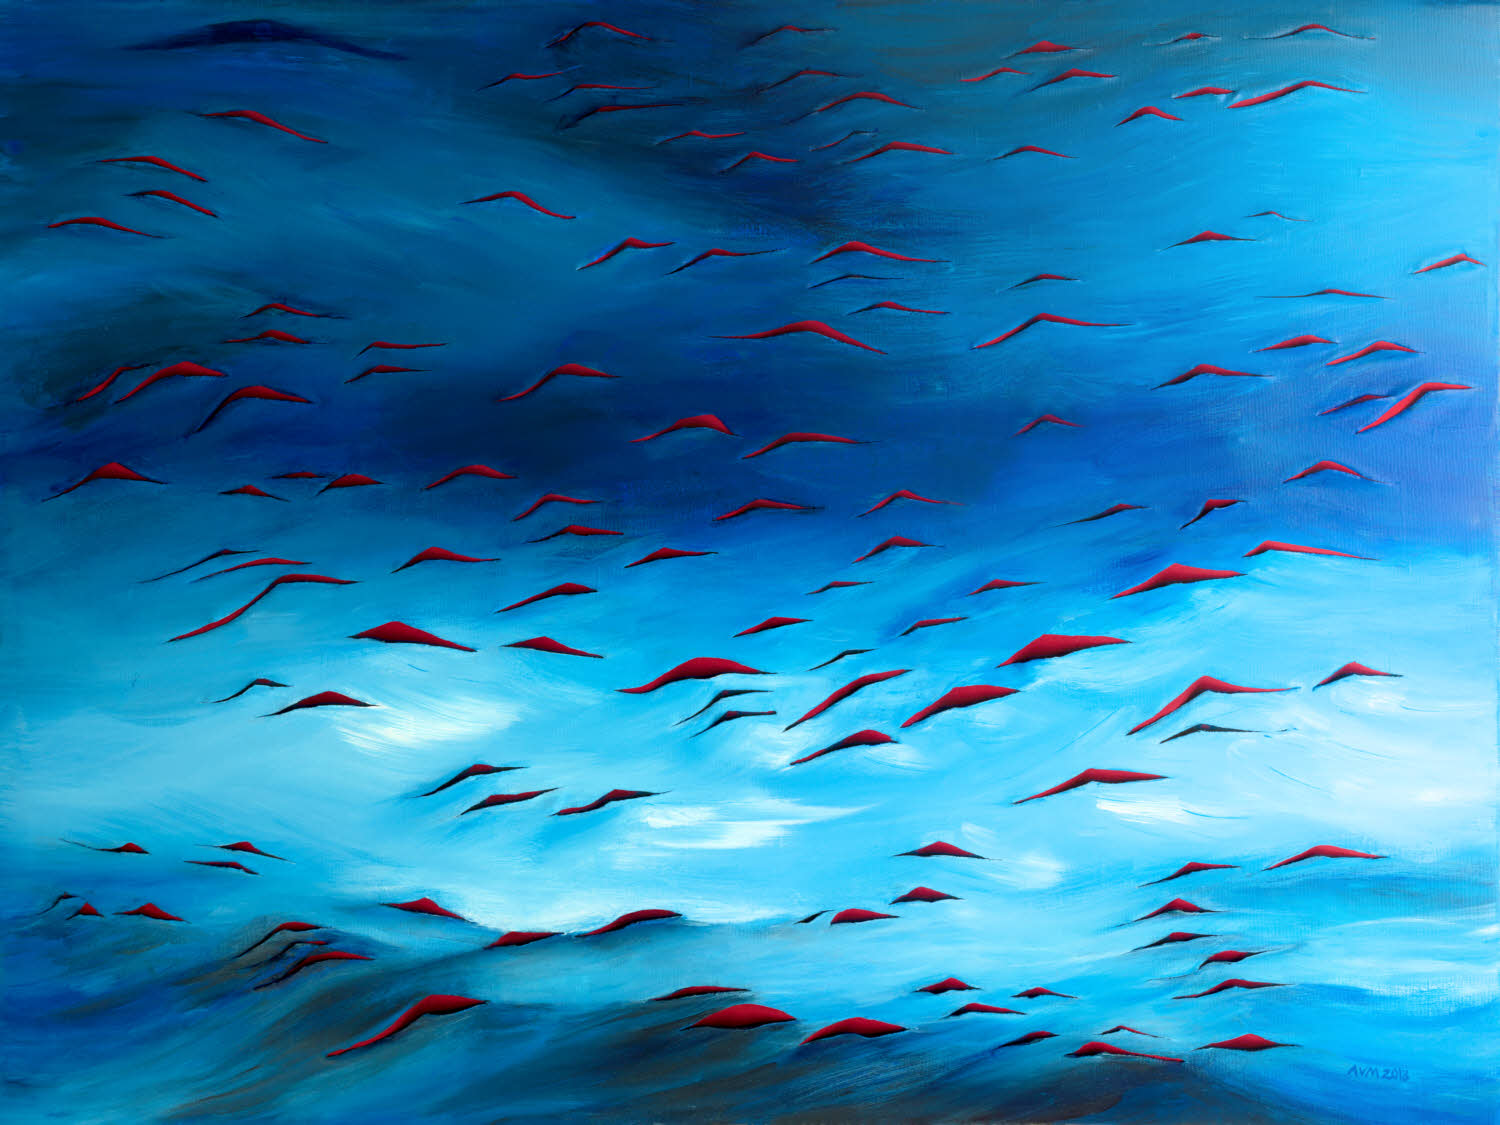 Blue White Red, 2013, acrylic on canvas with red background, 30x40 inches